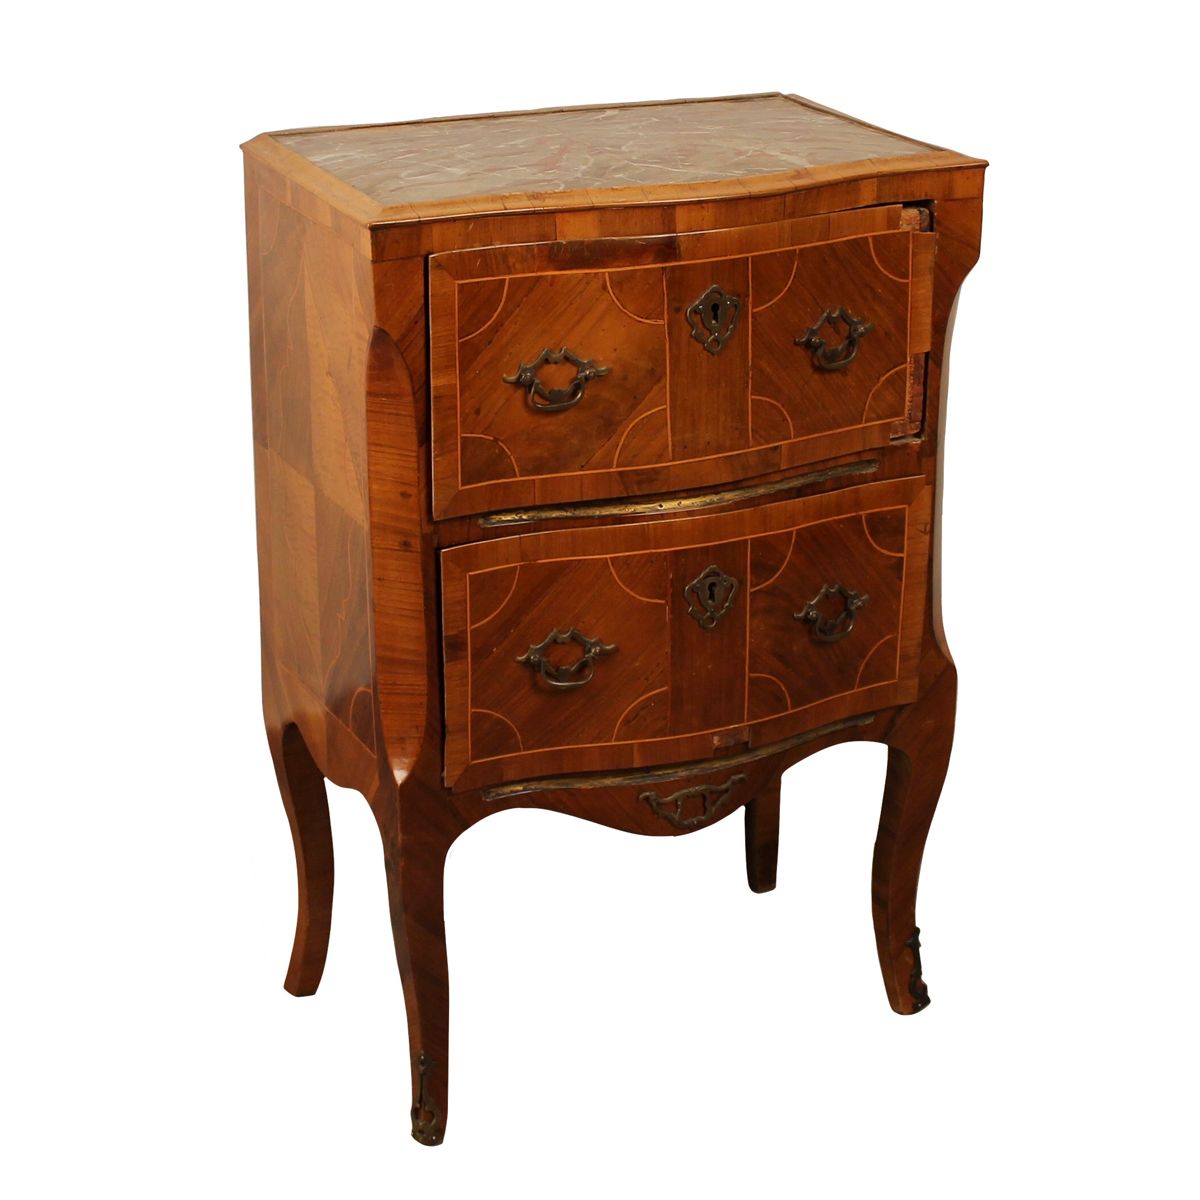 COMODINO A DUE CASSETTI - BEDSIDE TABLE WITH TWO DRAWERS Walnut inlaid with orna&hellip;